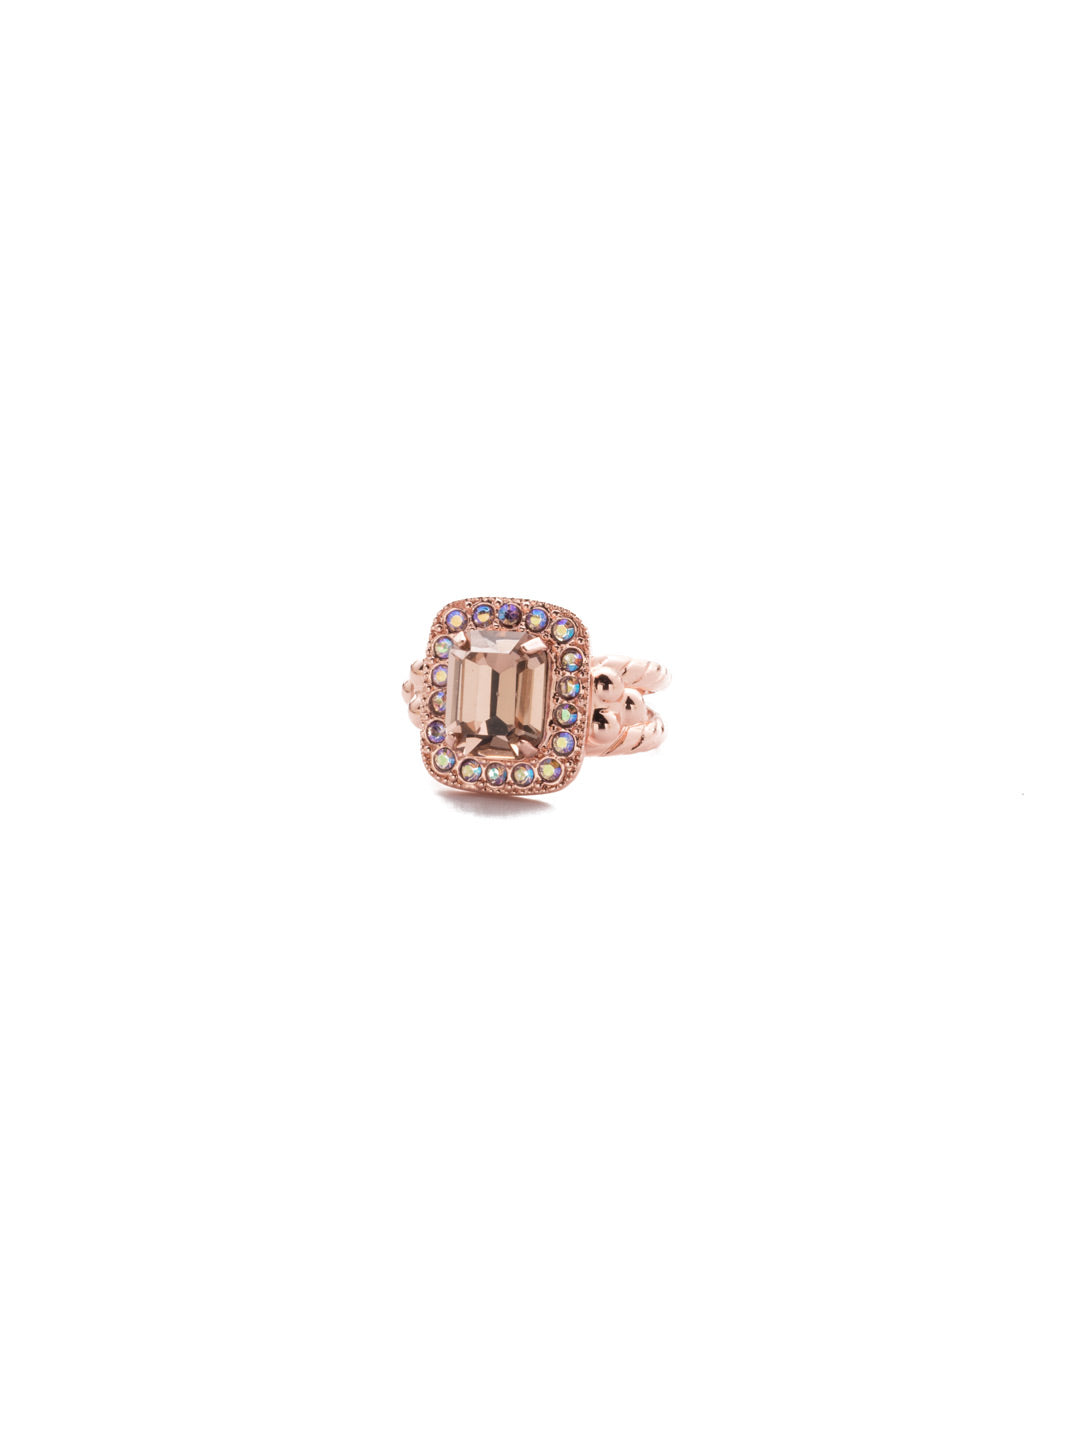 Opulent Octagon Cocktail Ring - RDQ41RGLVP - A central crystal surrounded by petite gems perches atop an adjustable double band. From Sorrelli's Lavender Peach collection in our Rose Gold-tone finish.